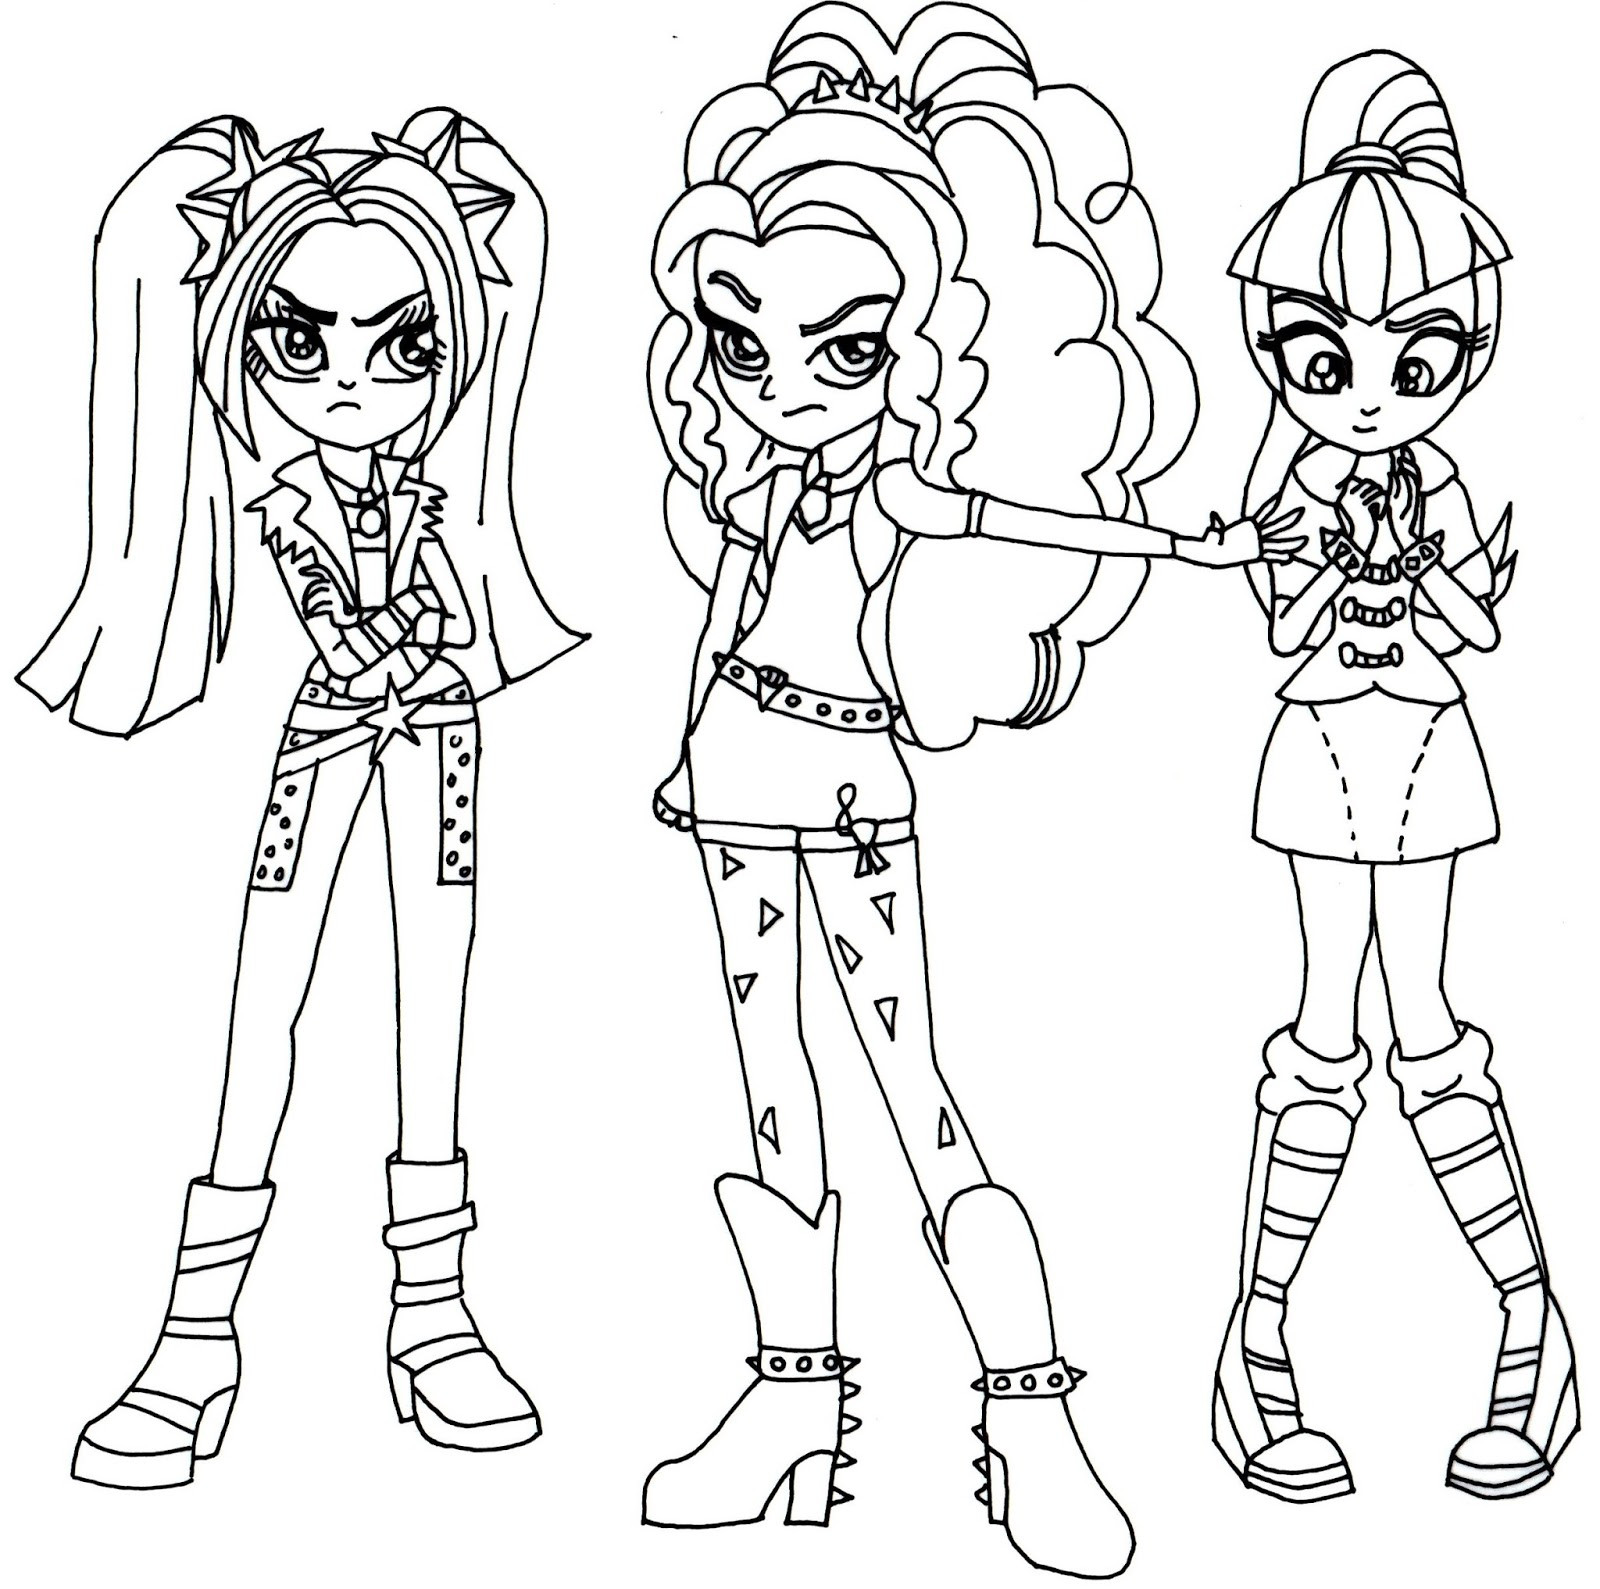 Mlp Equestria Girls Coloring Pages
 Free Printable My Little Pony Coloring Pages Villain in